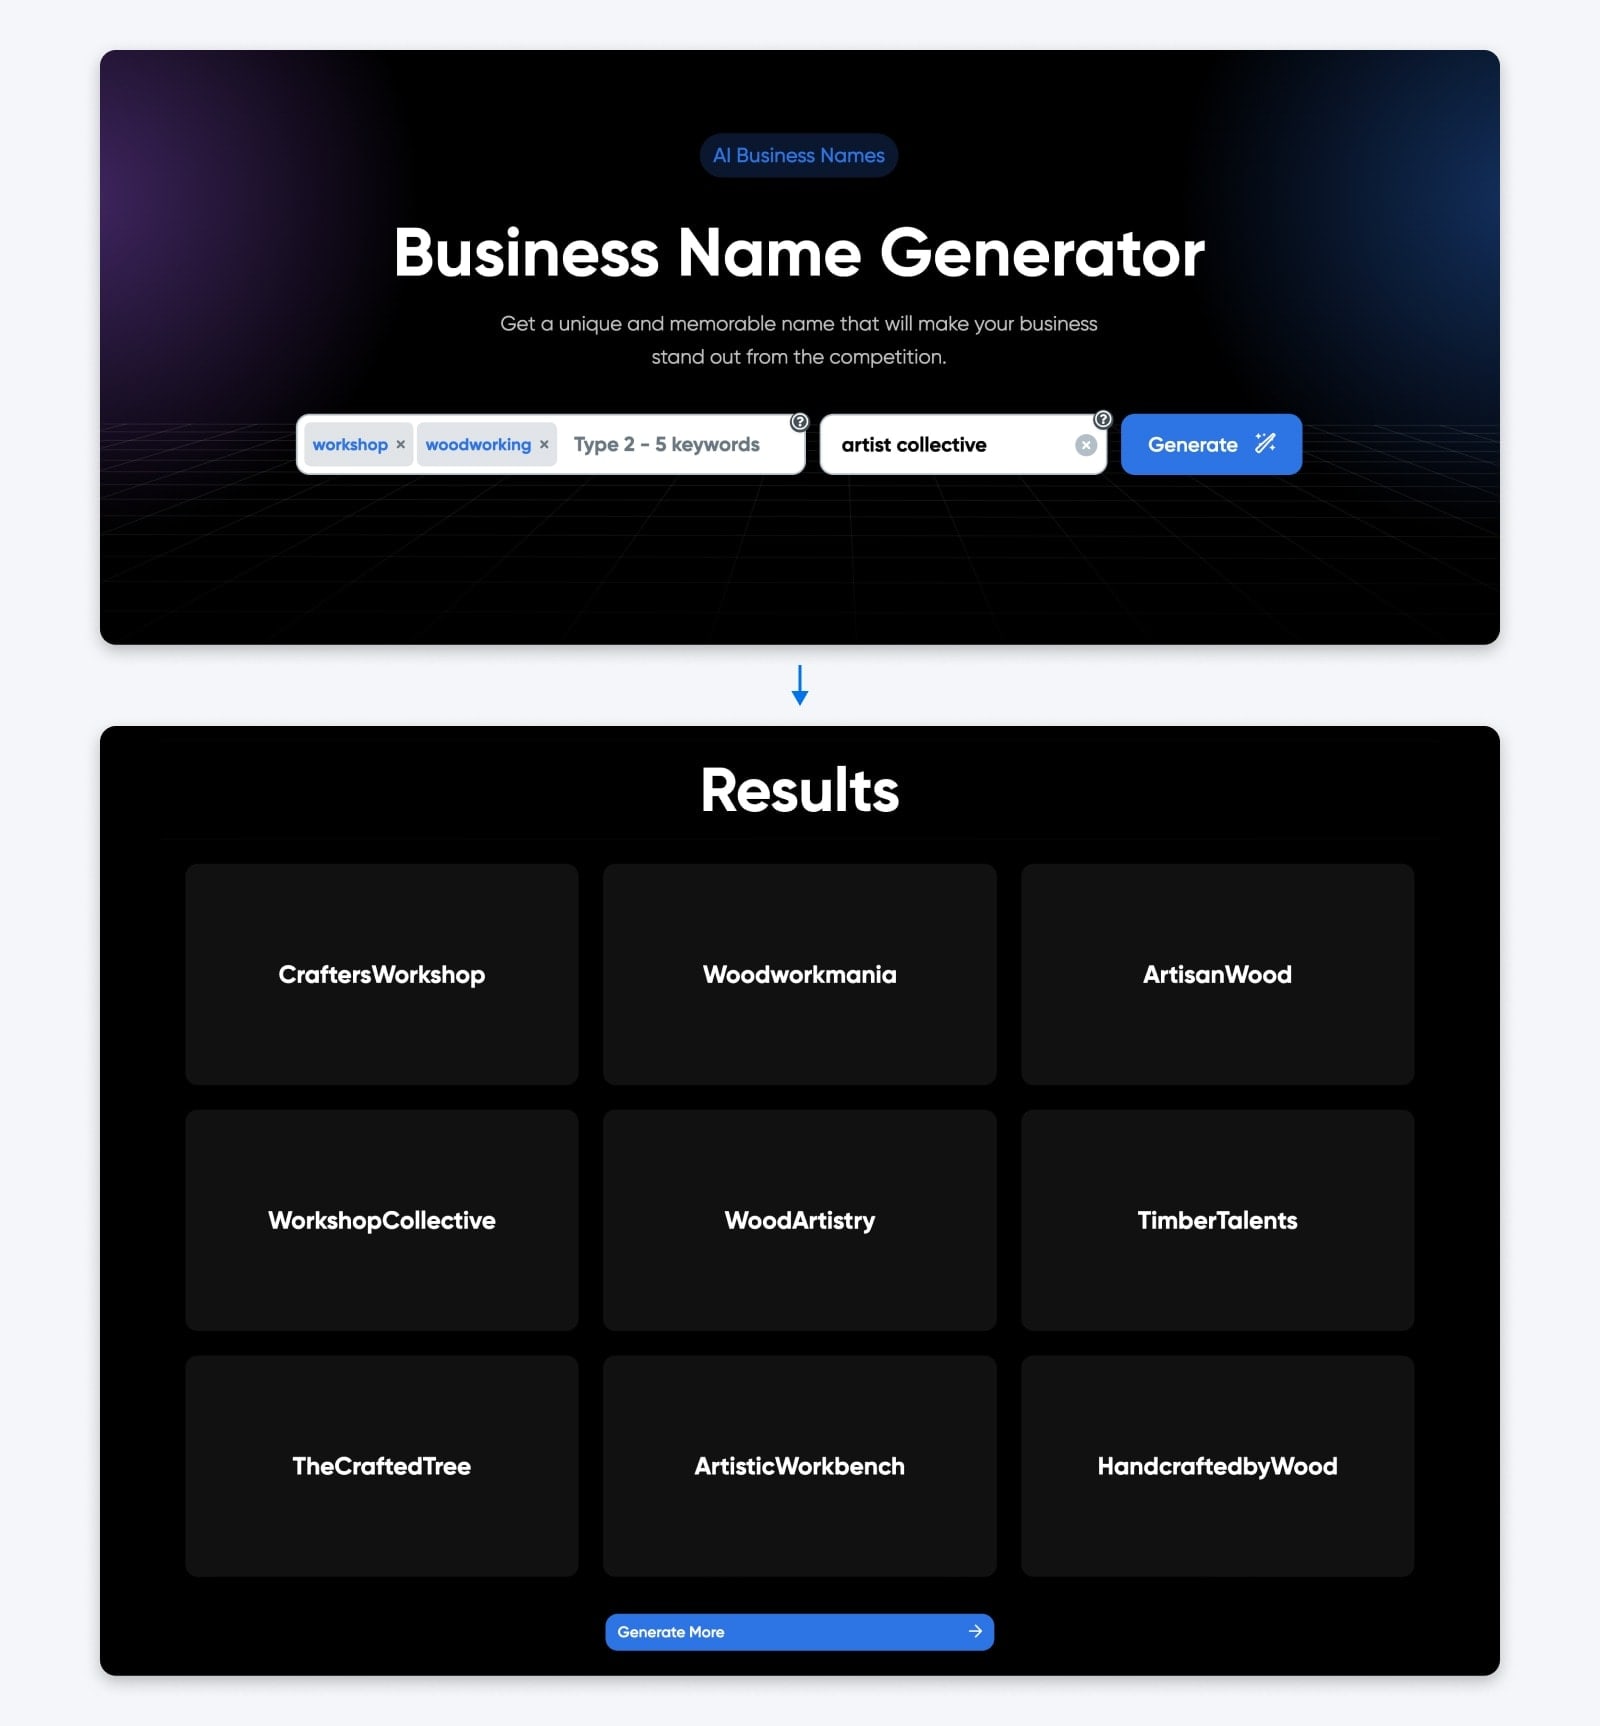 DreamHost Business Name Generator